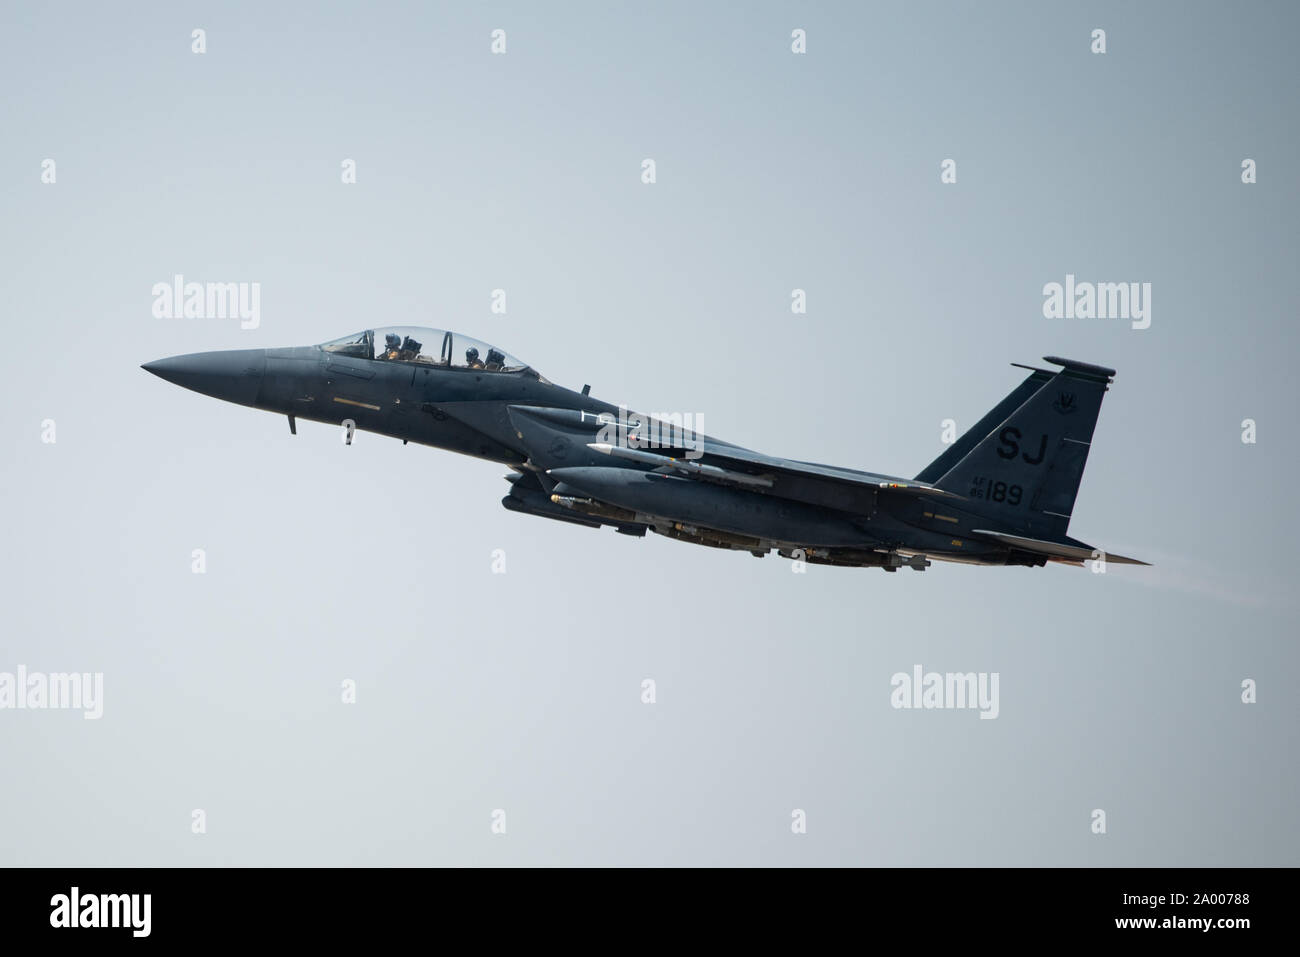 An F-15E Strike Eagle, assigned to the 336th Expeditionary Fighter Squadron, takes off for Agile Strike Sept. 18, 2019, at Al Dhafra Air Base, United Arab Emirates. The 336th EFS sent two aircraft and personnel to operate missions out of Prince Sultan Air Base, Saudi Arabia to challenge their flexibility at expanding tactical and strategic reach while strengthening coalition and regional partnerships in the Air Forces Central Command area of responsibility through adaptive basing. (U.S. Air Force photo by Staff Sgt. Chris Thornbury) Stock Photo